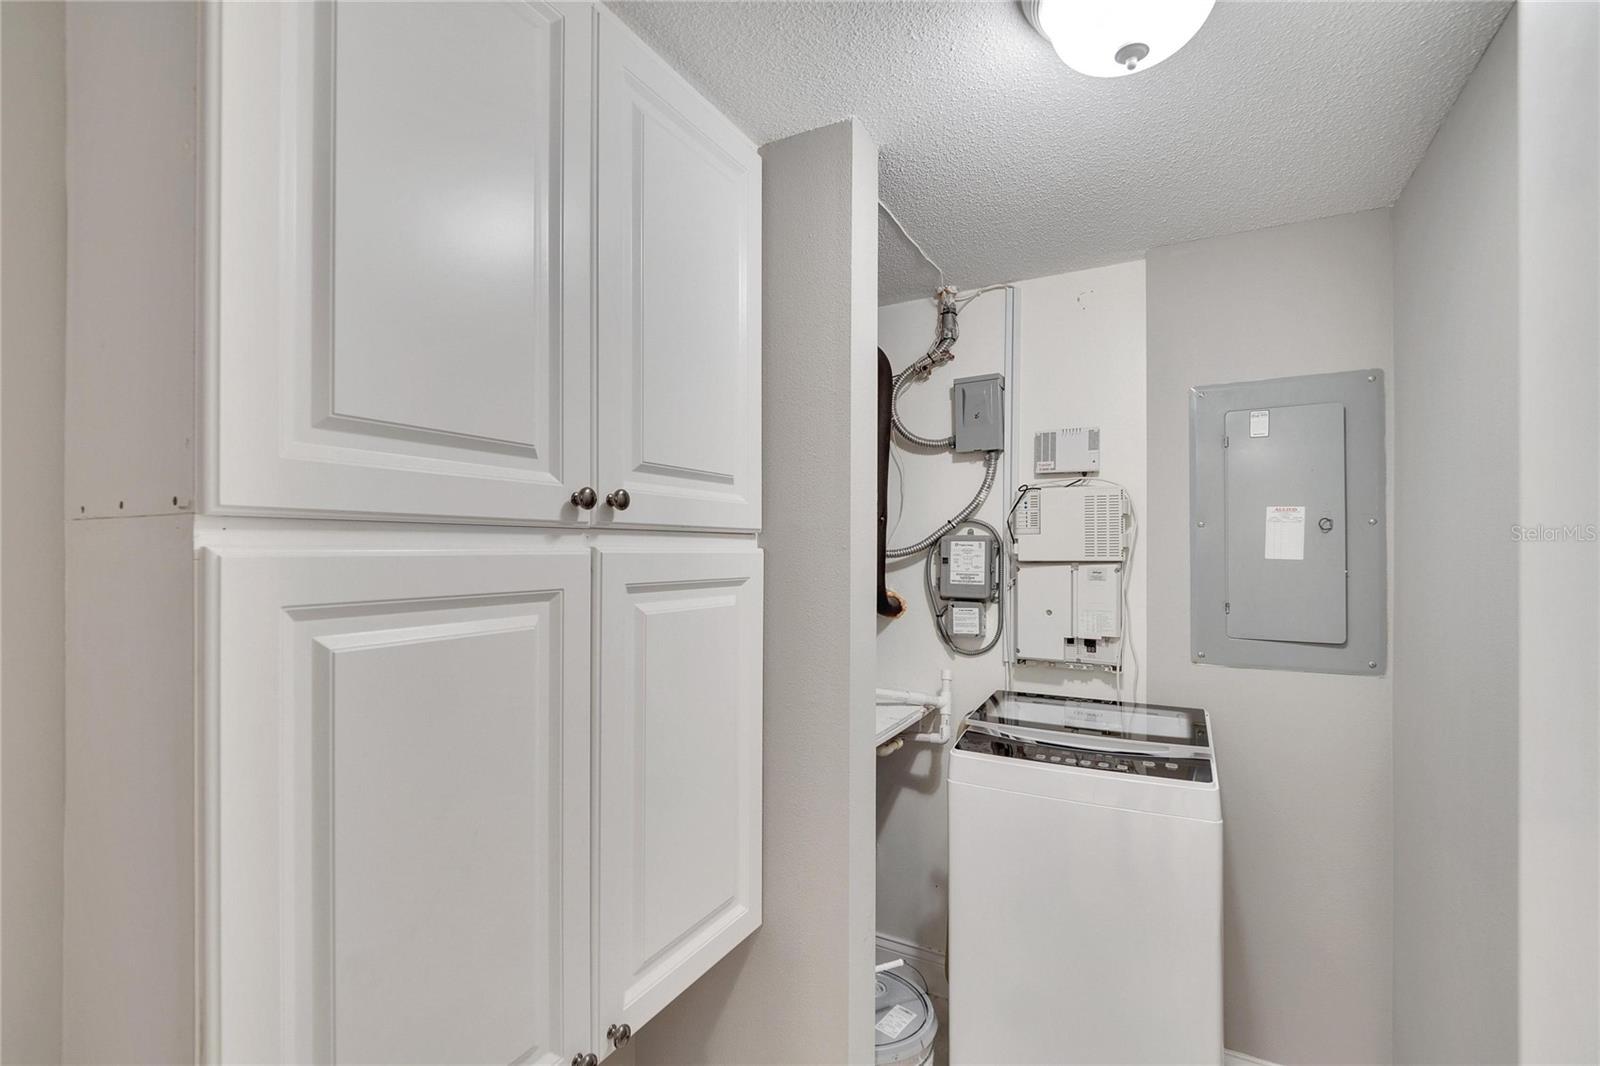 Utility room in hallway with portable washer included.